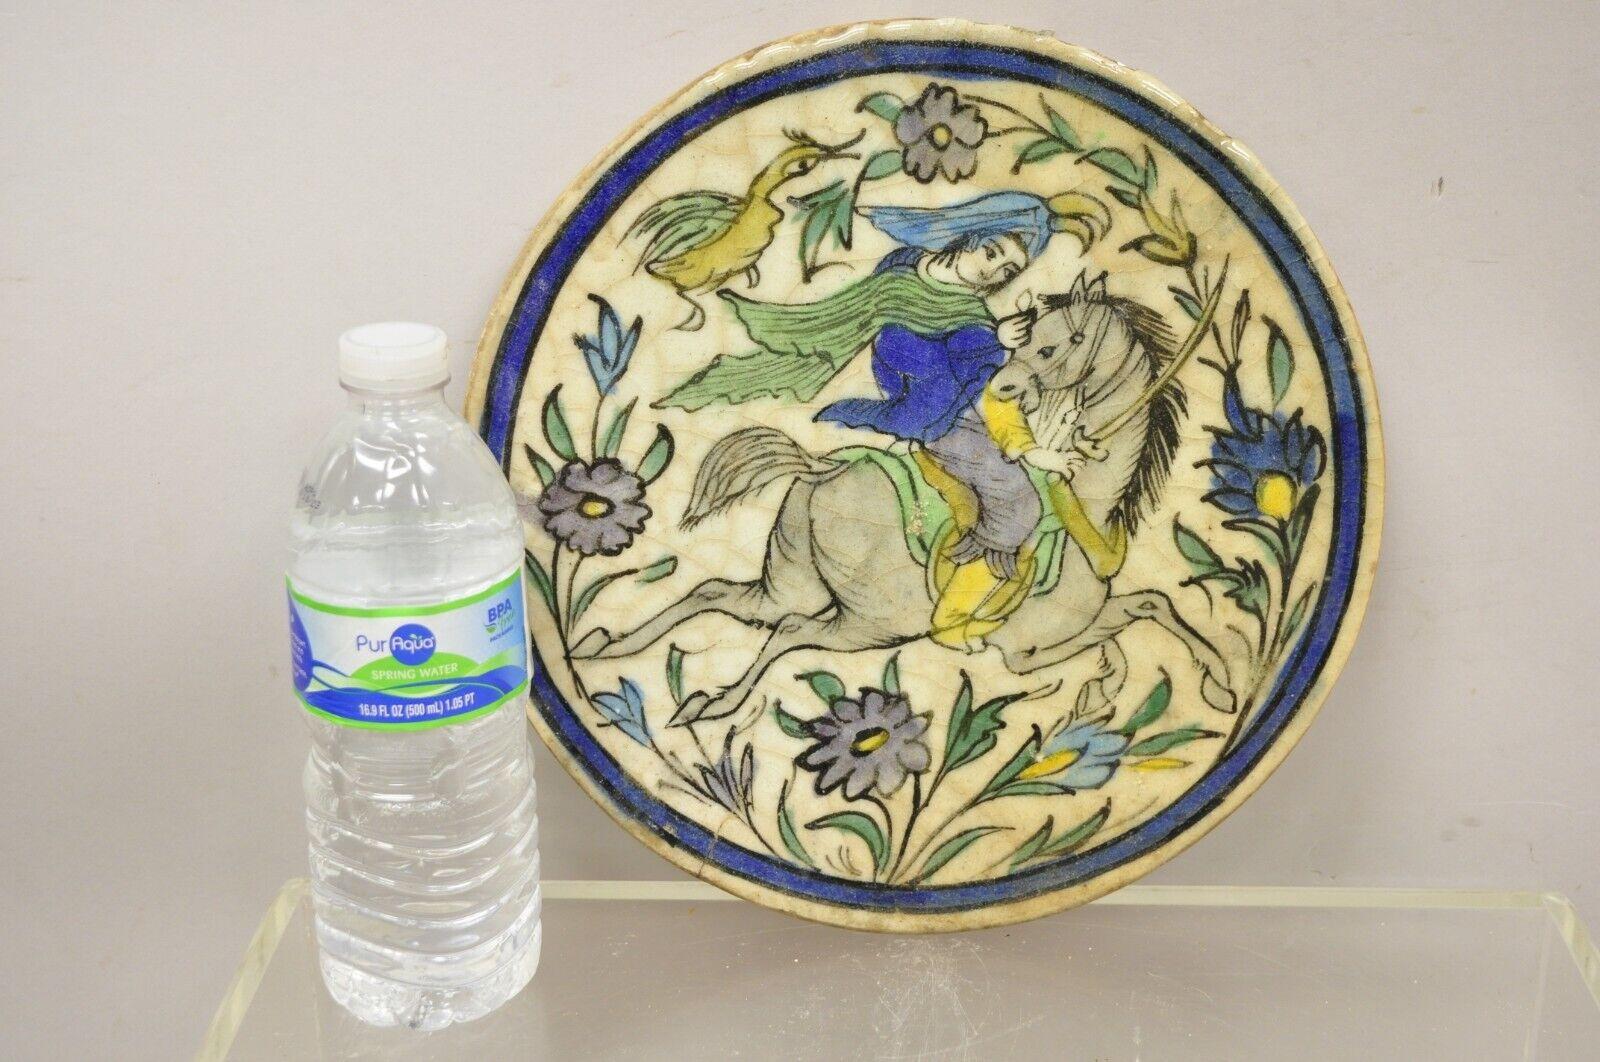 Antique Persian Iznik Qajar style ceramic Pottery round tile horse and rider, blue Garb C4. Item features original crackle glazed finish, heavy ceramic pottery construction, very impressive detail, wonderful style and form. Great to mount as wall